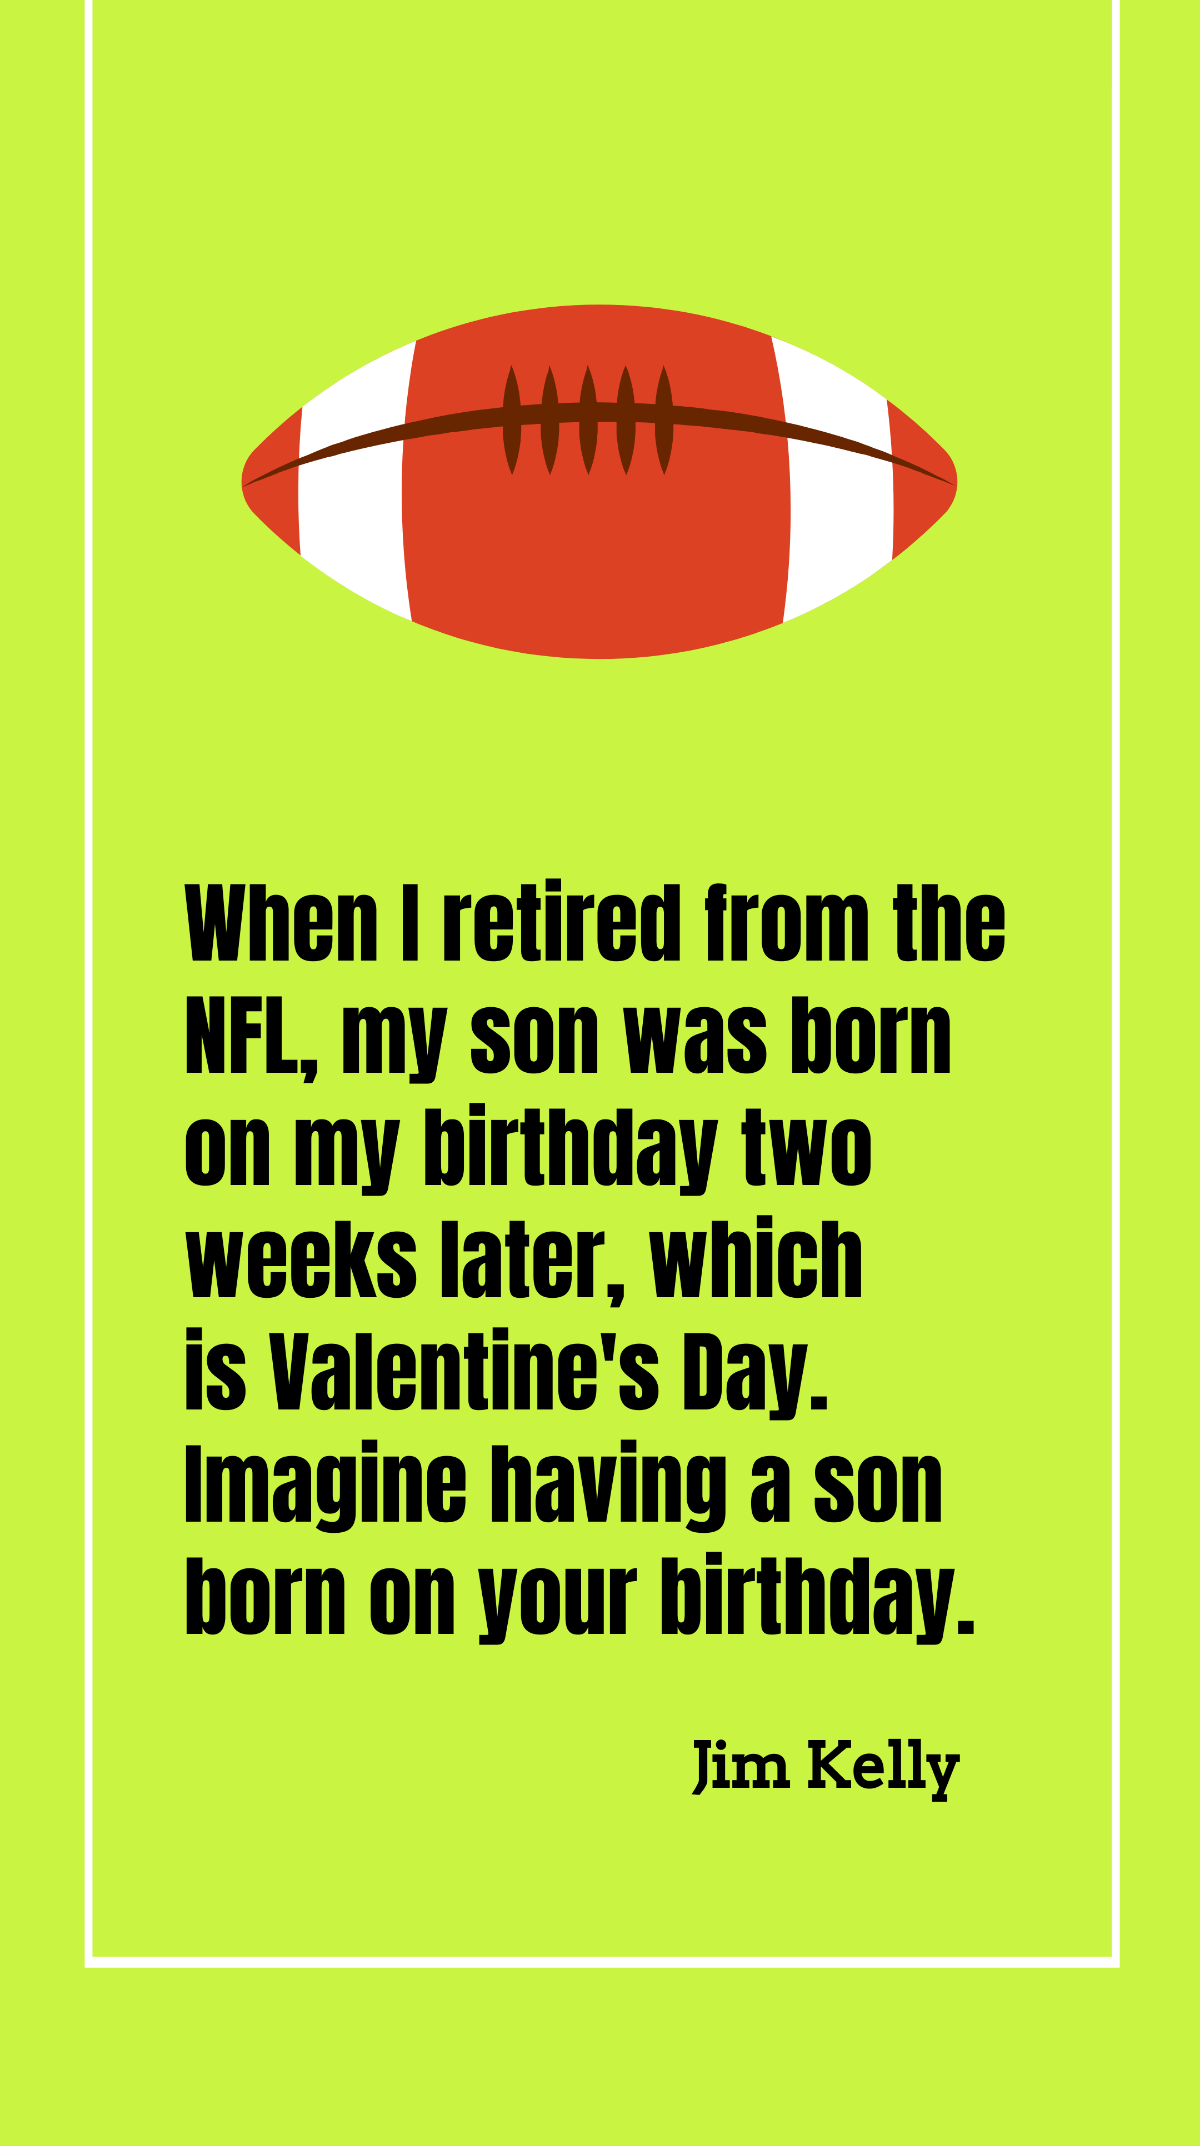 Jim Kelly - When I retired from the NFL, my son was born on my birthday two weeks later, which is Valentine's Day. Imagine having a son born on your birthday. Template